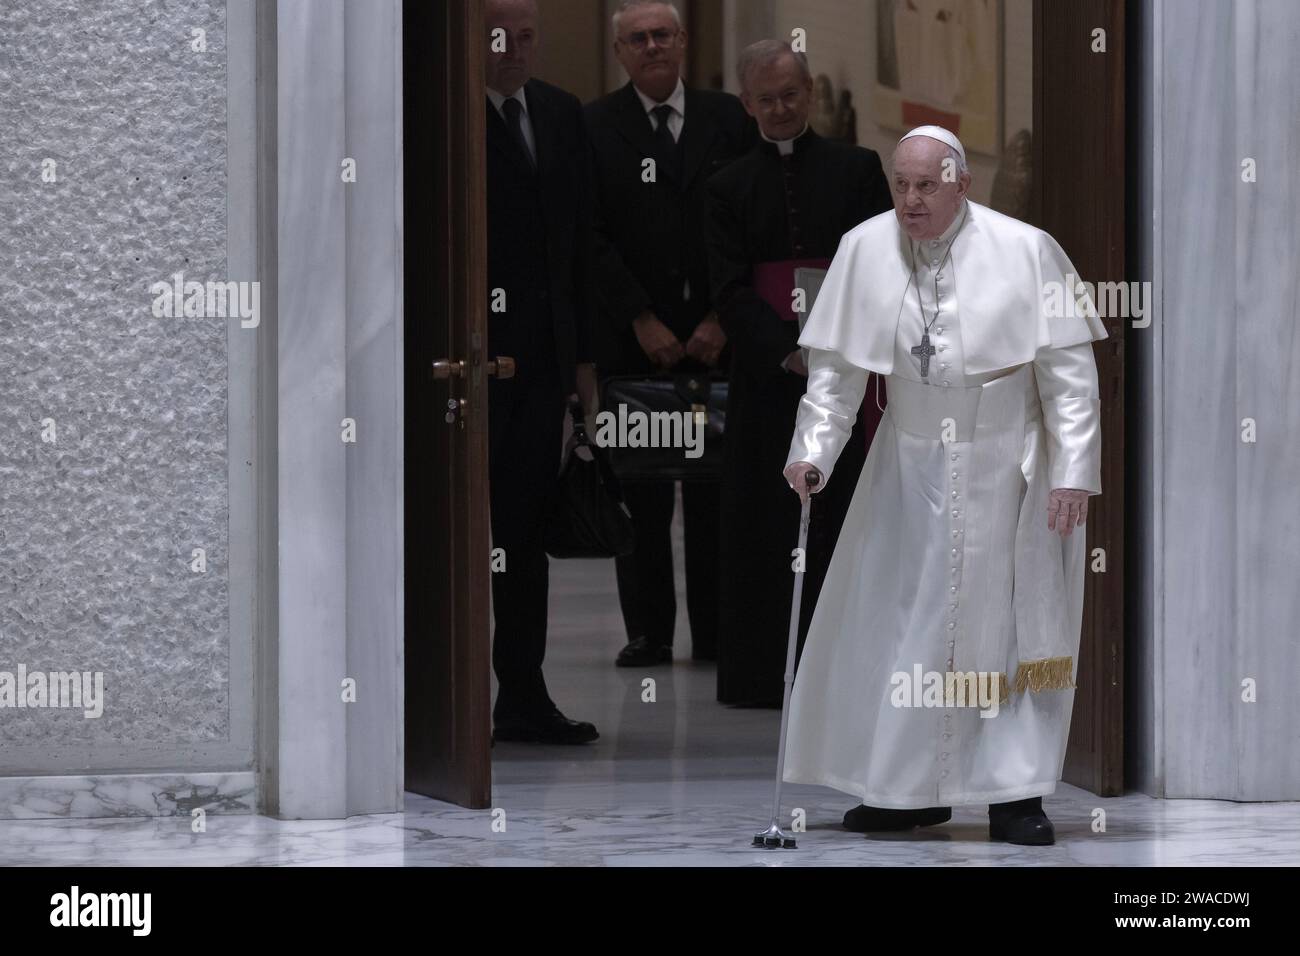 Vatican City Vatican 3 January 2024 Pope Francis During His Weekly General Audience In The Paul Vi Hall At The Vatican Maria Grazia Picciarellaalamy Live News 2WACDWJ 